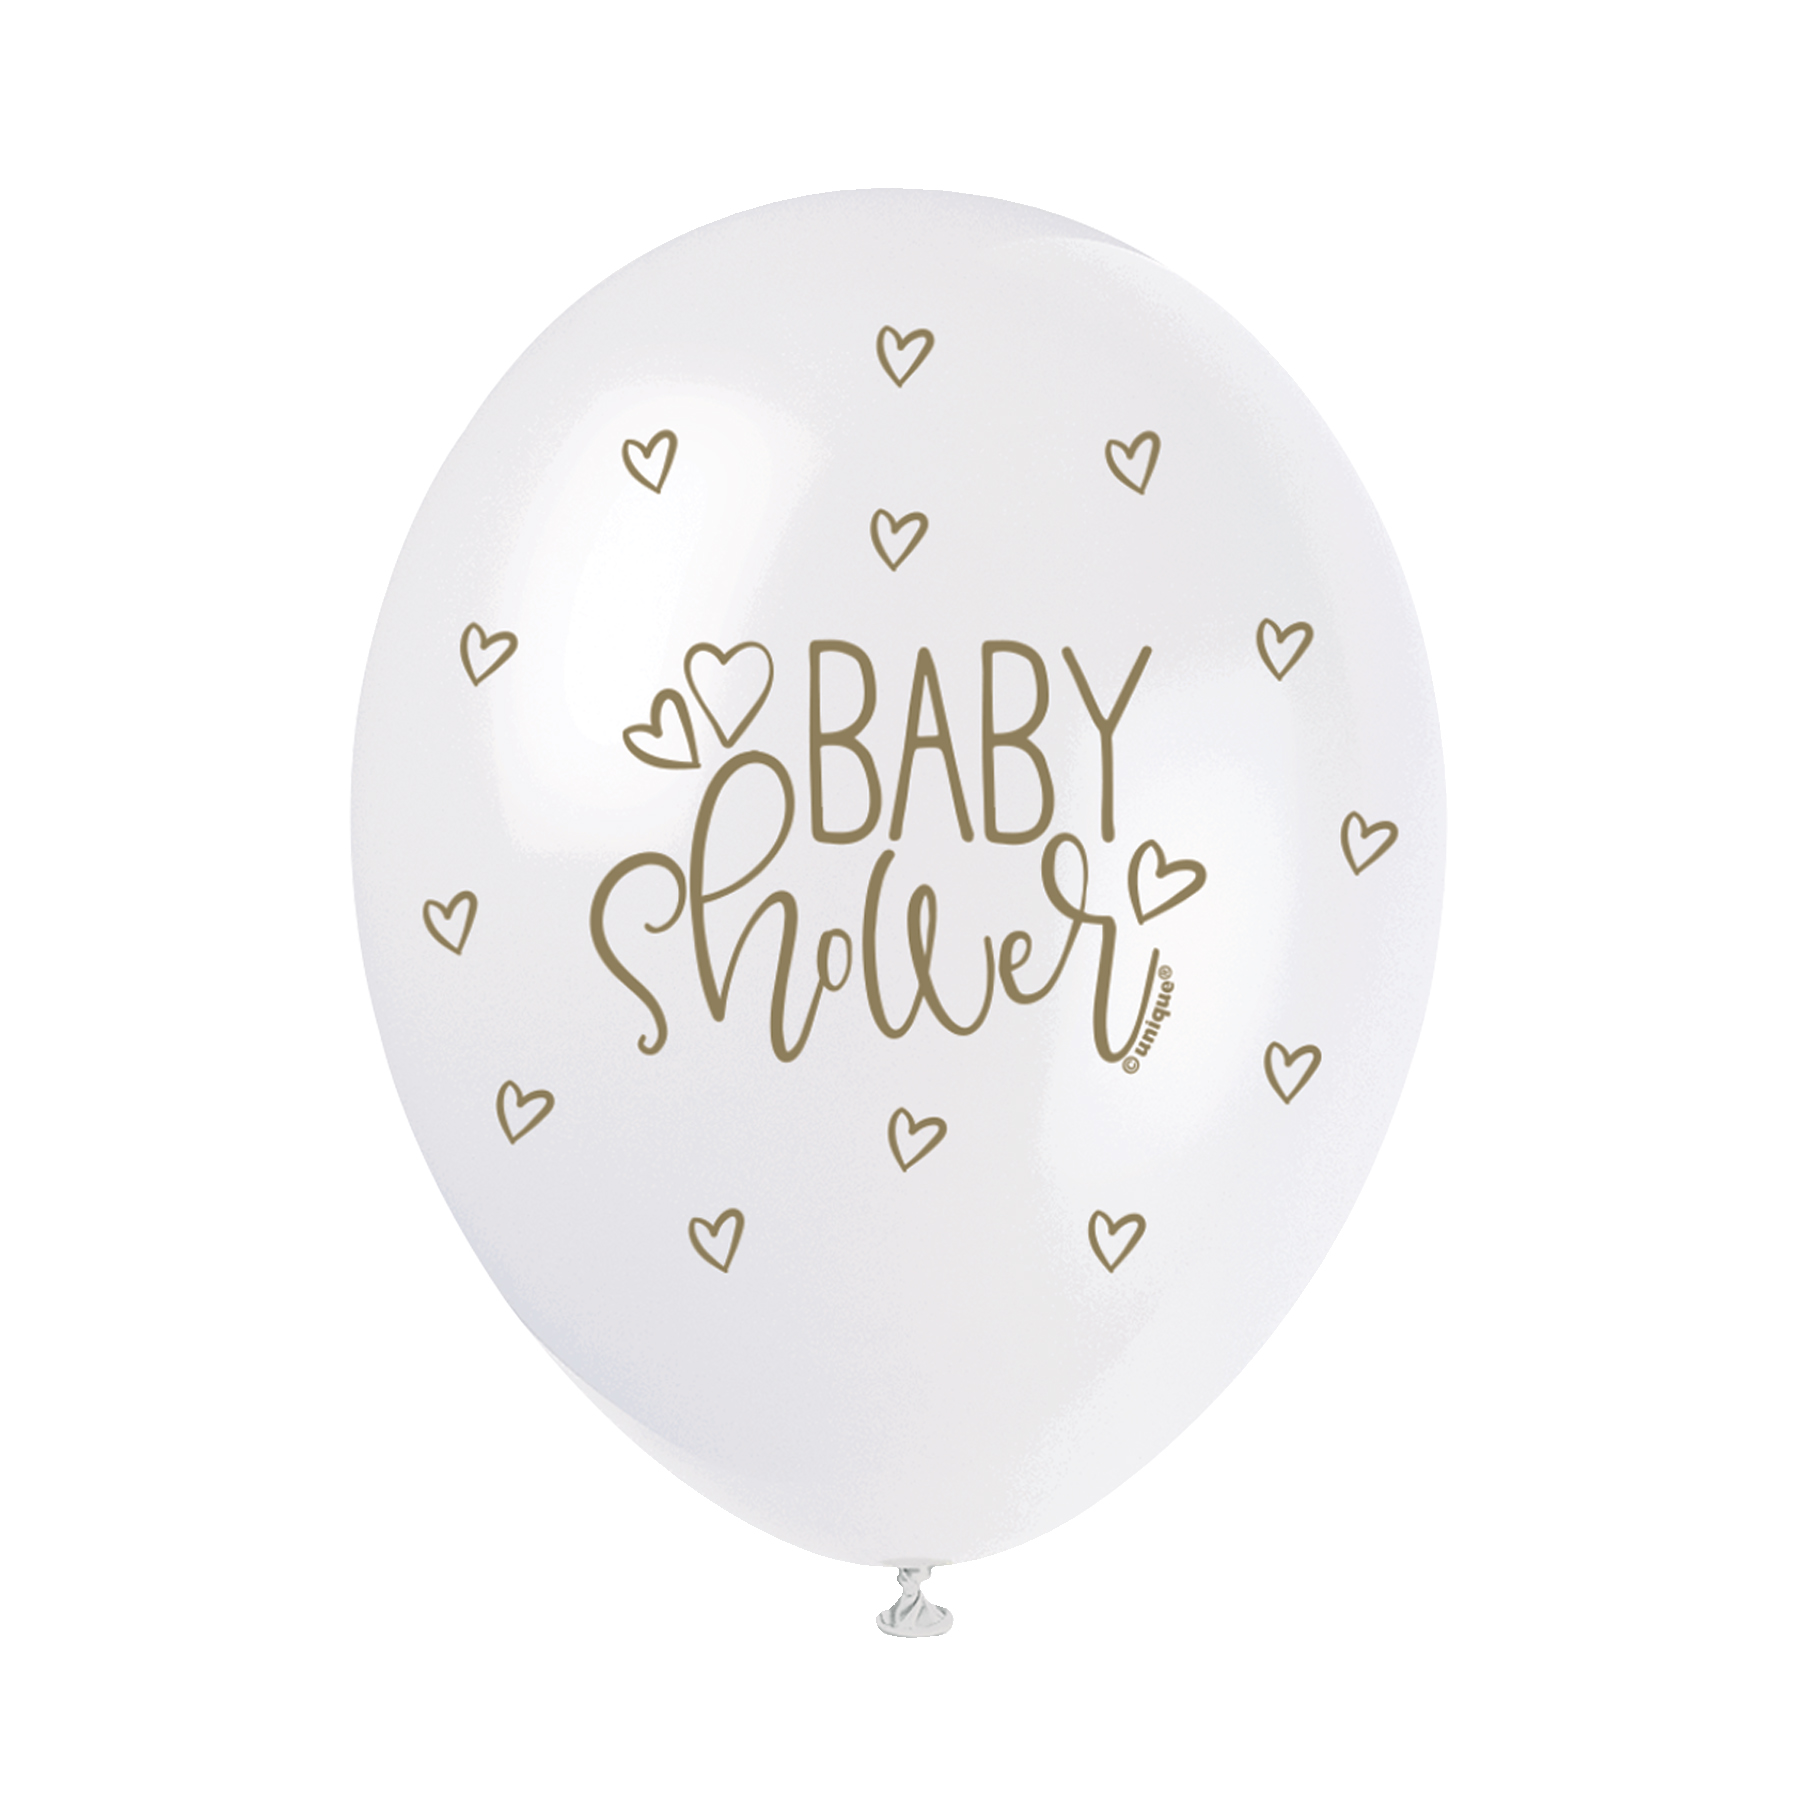 BABY SHOWER GOLD COLOR PRINTED BALLOONS  PACK OF 5